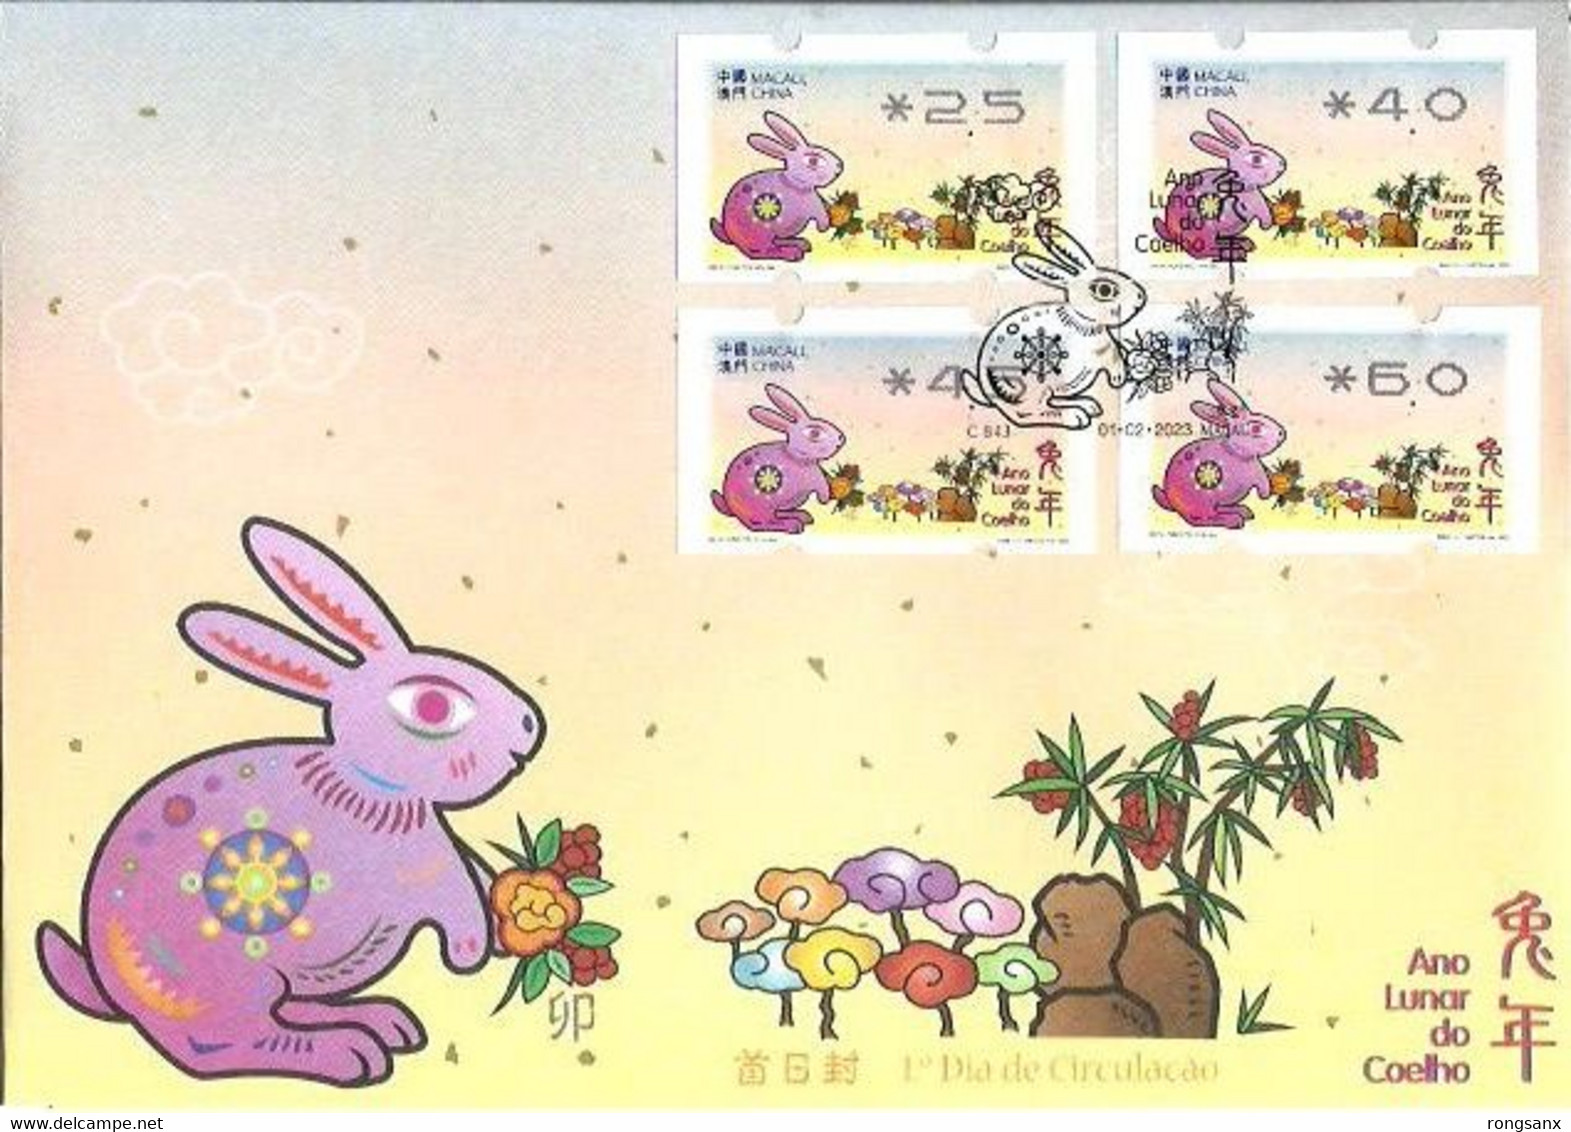 2023 MACAO/MACAU YEAR OF THE RABBIT ATM LABELFDC - FDC